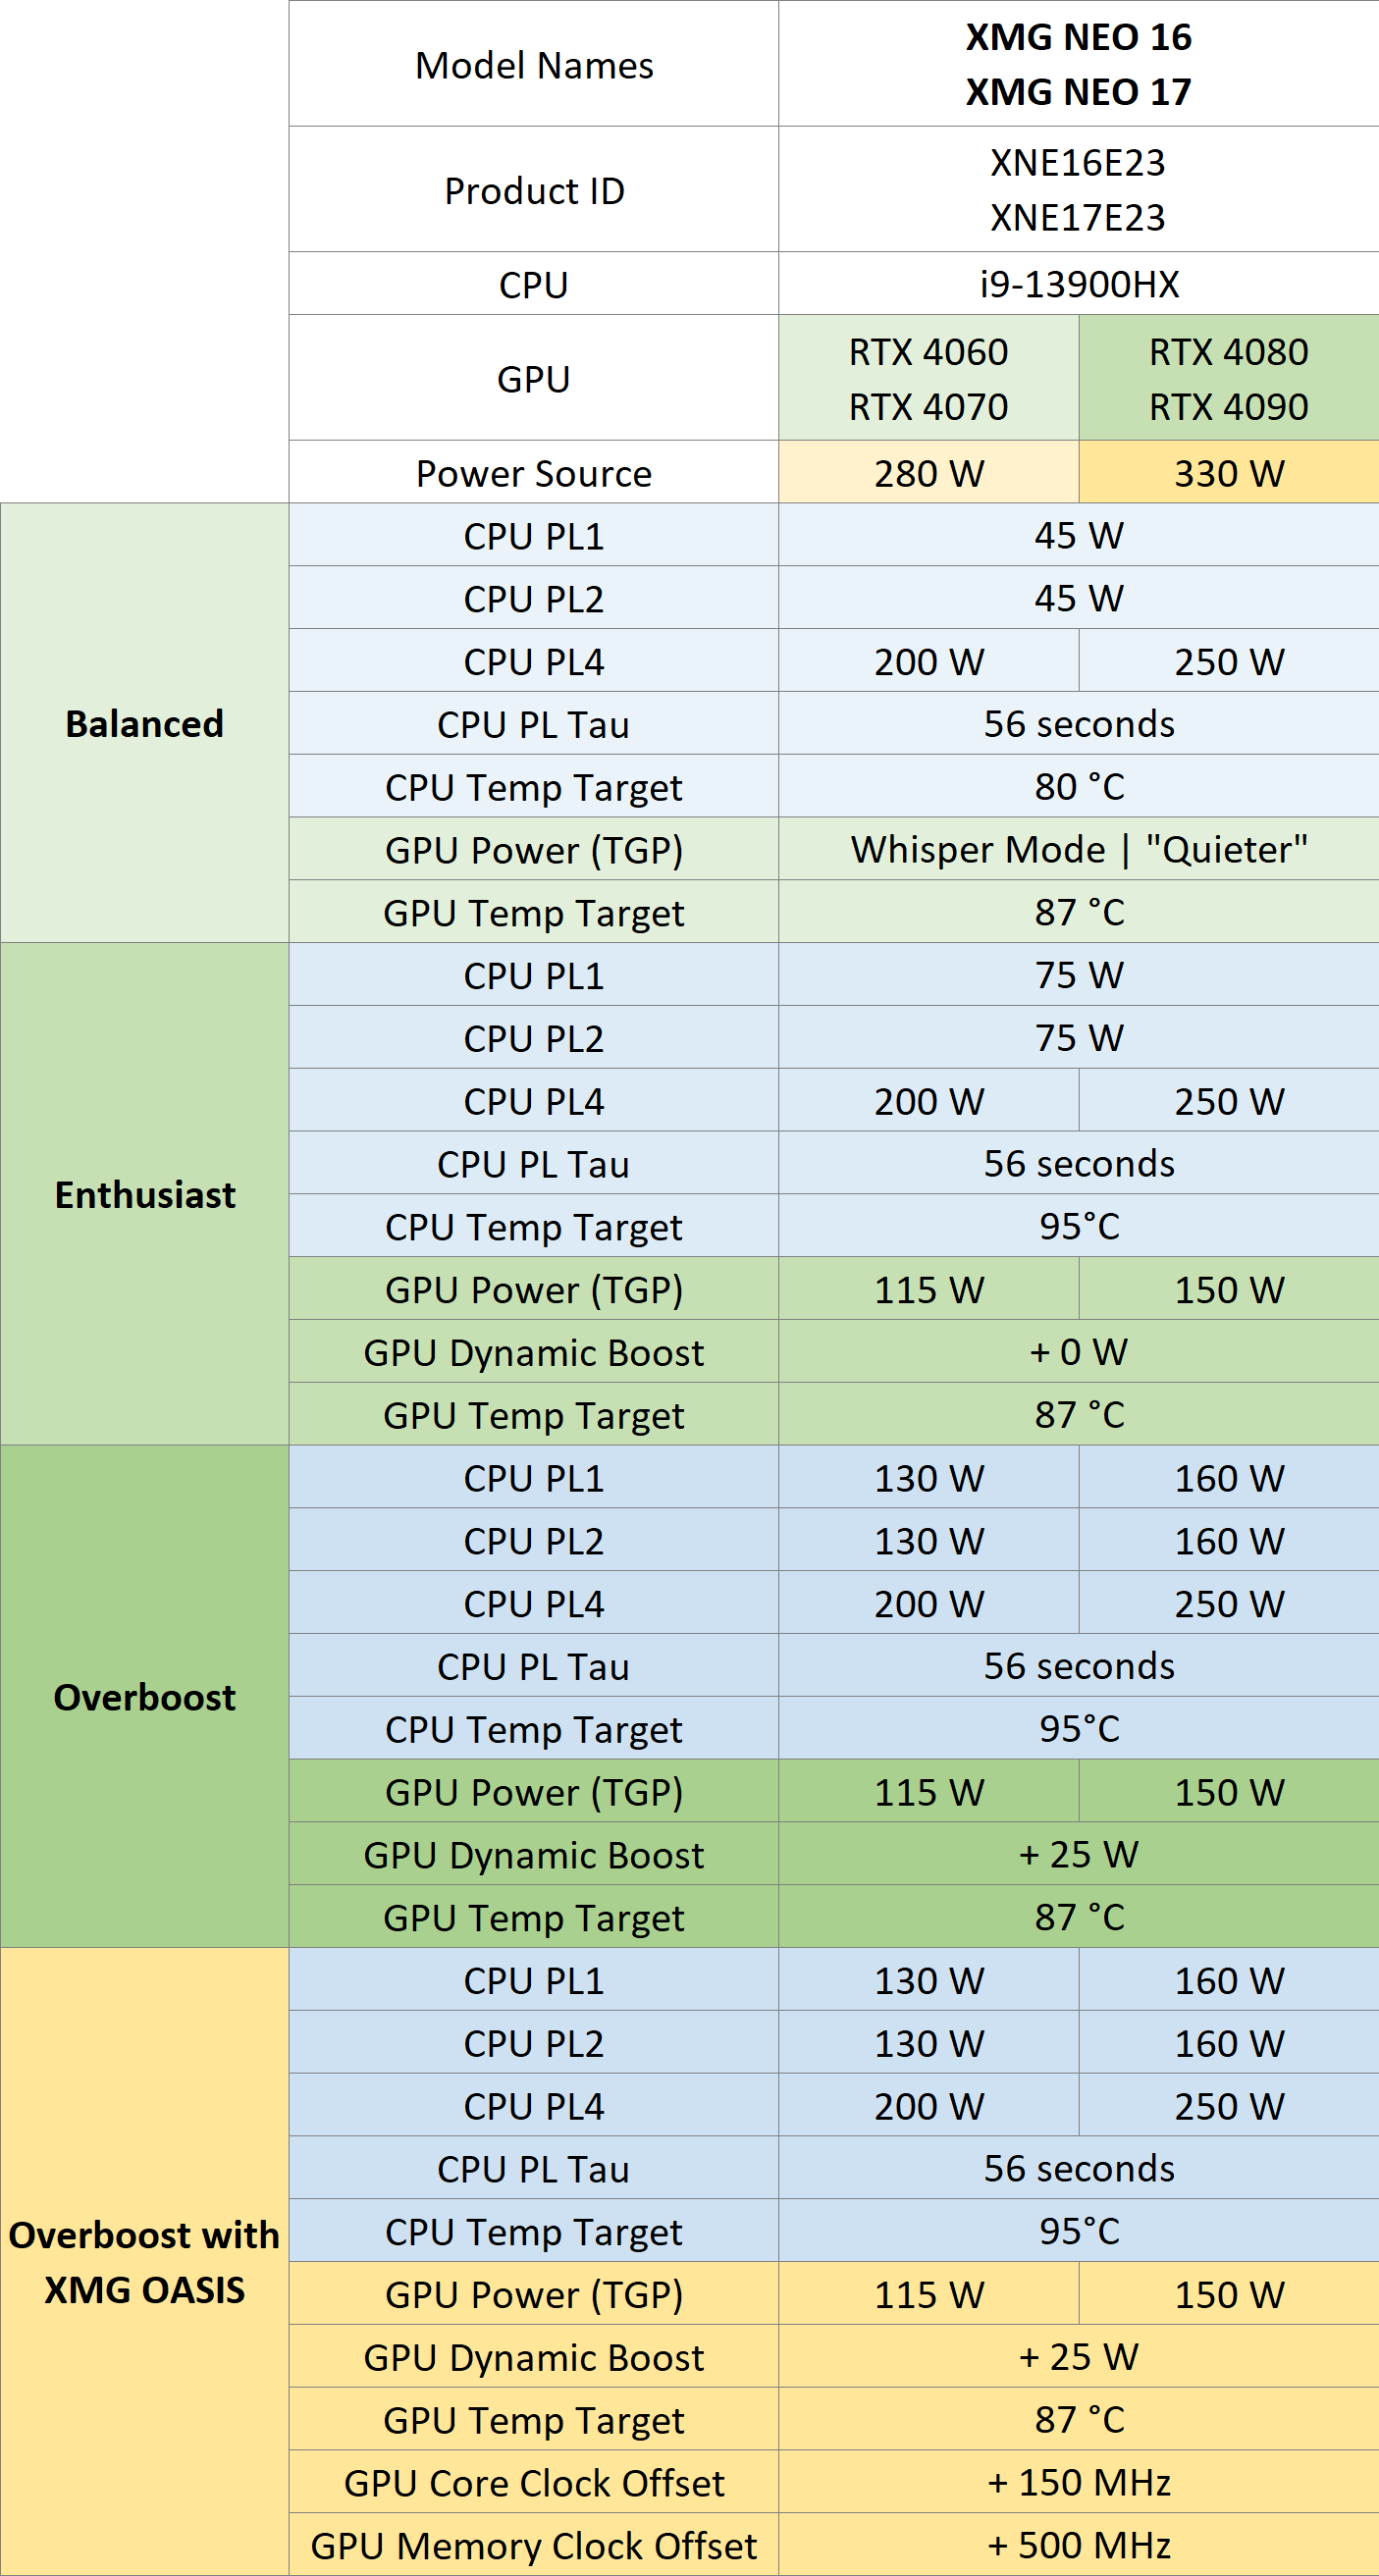 Table with default values for all performance profiles in XMG NEO (E23)